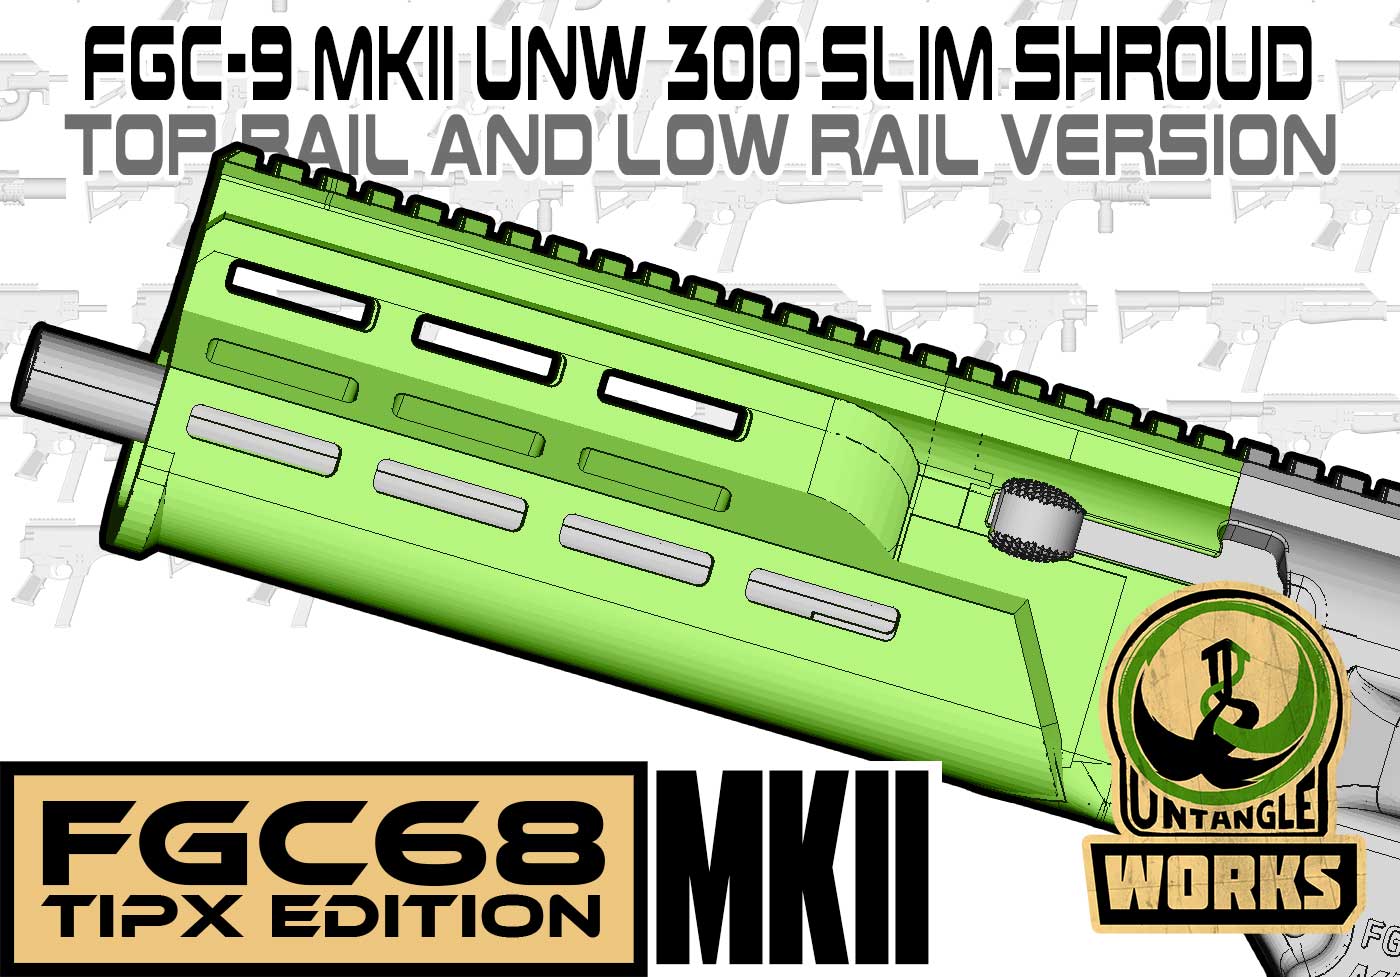 FGC68-MKII UNW300 SLIM shroud for your magfed paintball marker